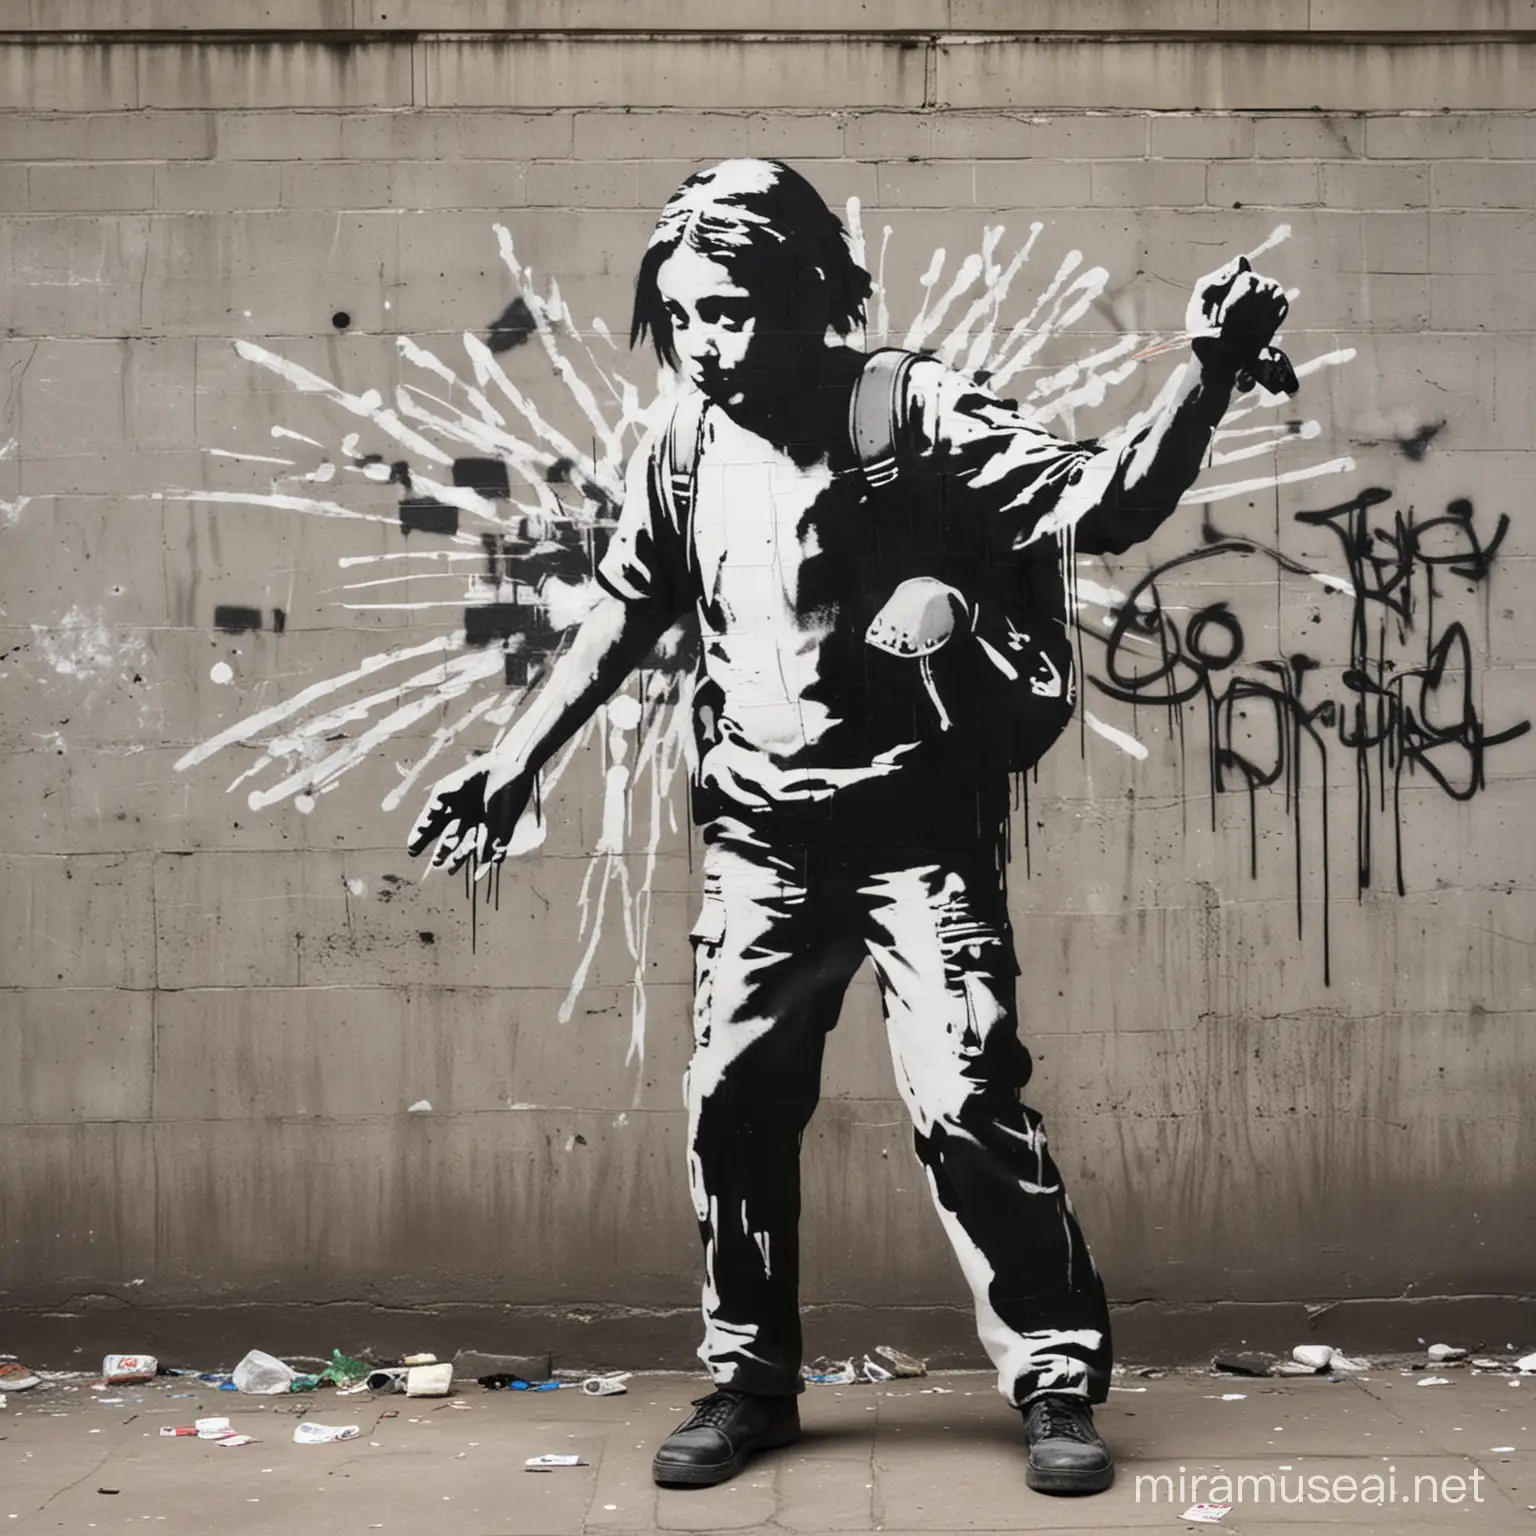 create me an image with a school shooting massage in the famous graffiti artist style, Banksy style
